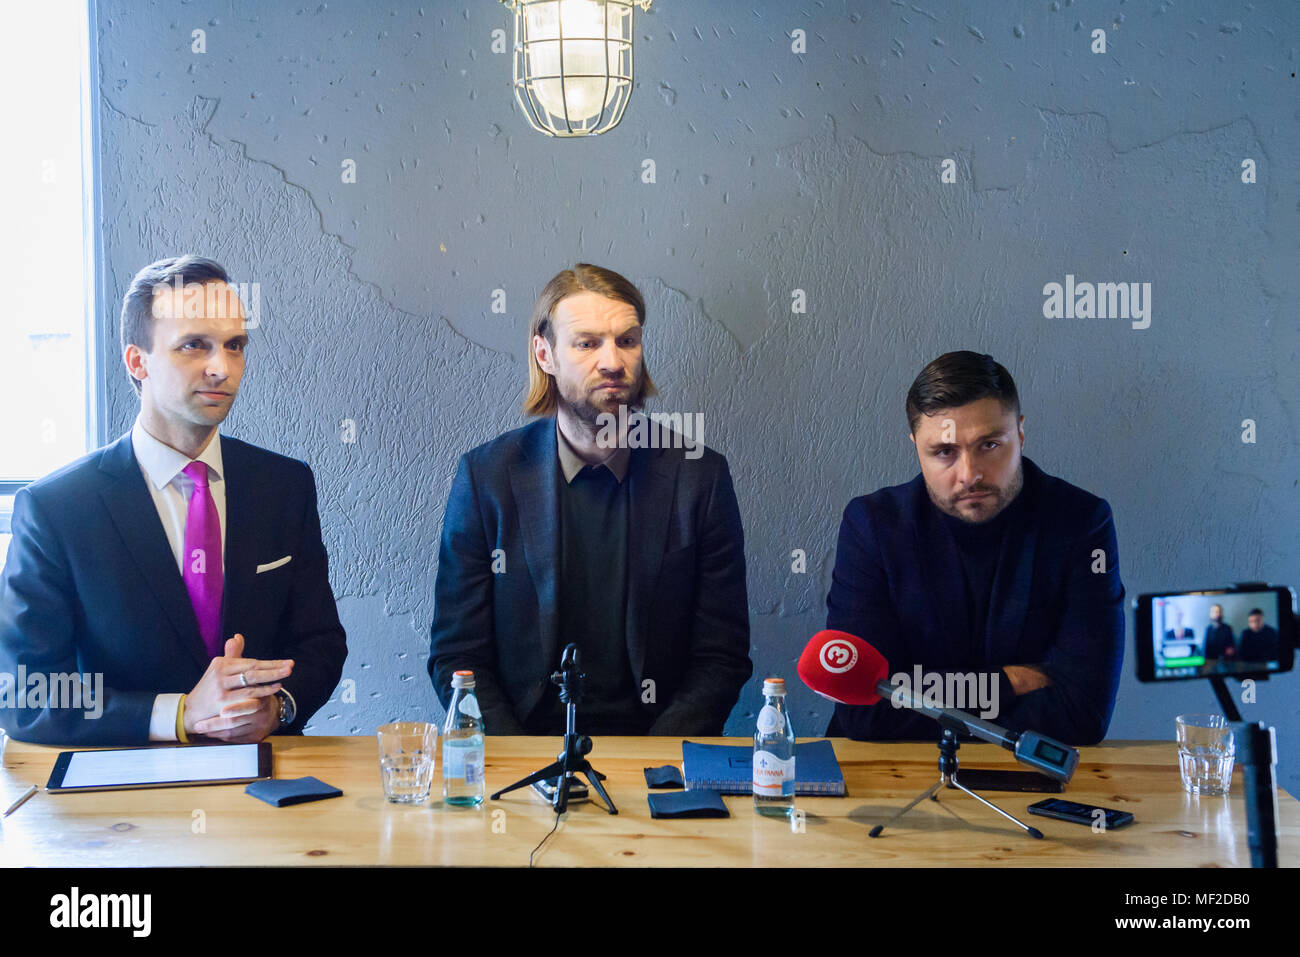 24.04.2018. RIGA, LATVIA. Former professional football player Kaspars Gorkss, candidate for LFF president press conference before elections for President of Latvian Football Federation. Stock Photo